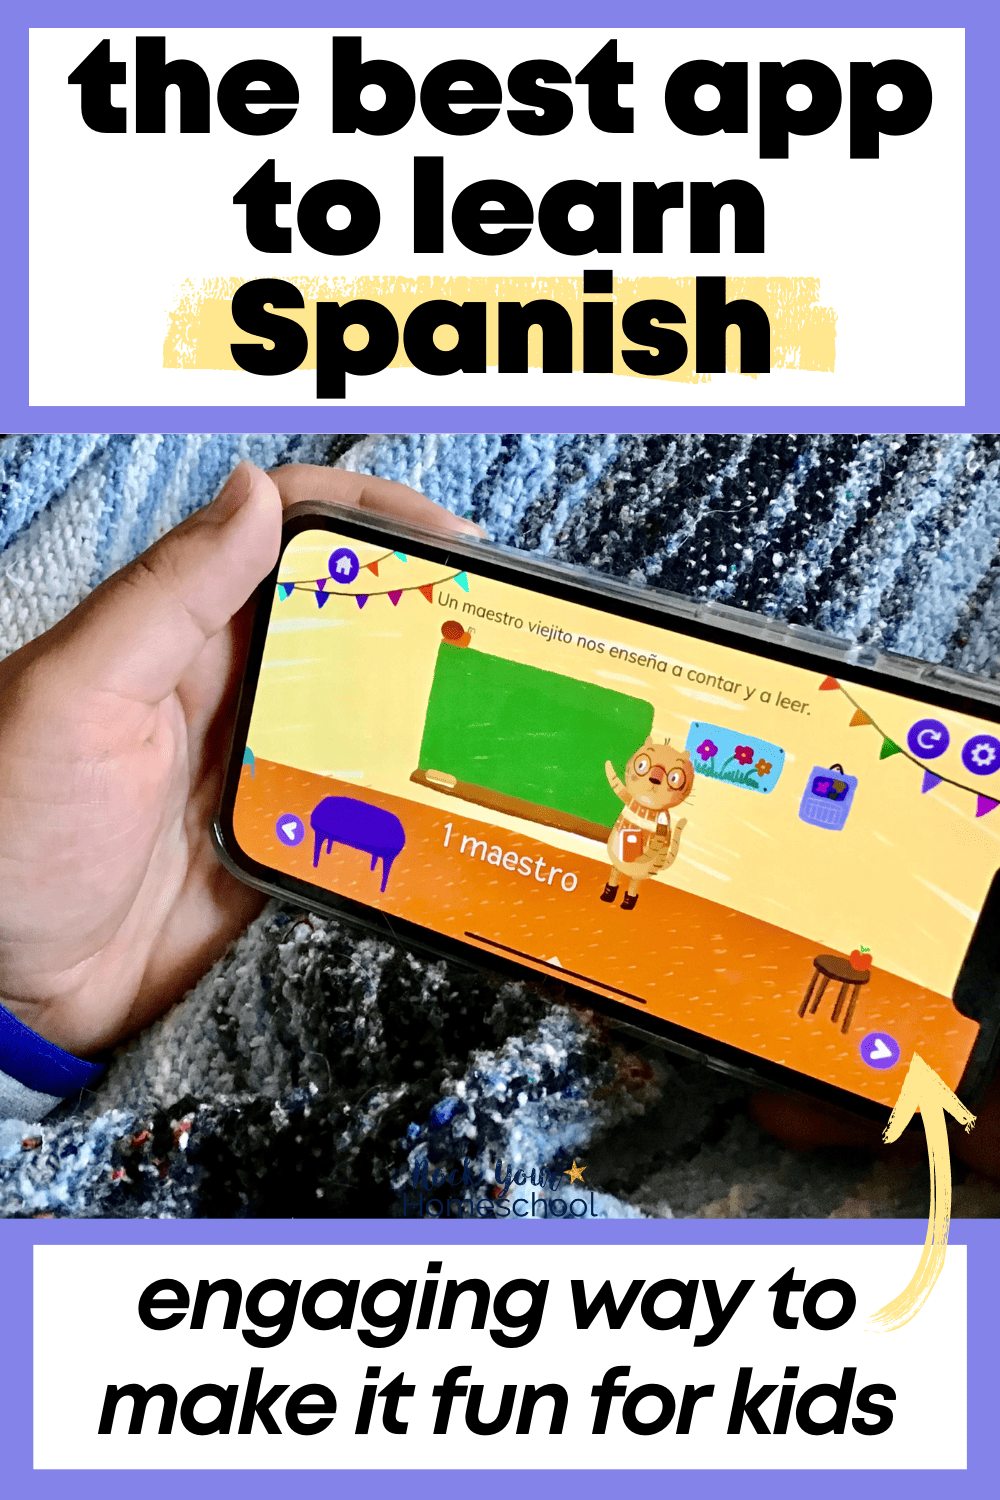 How to Teach Spanish to Kids: The 5 Best Apps to Learn Spanish at Home